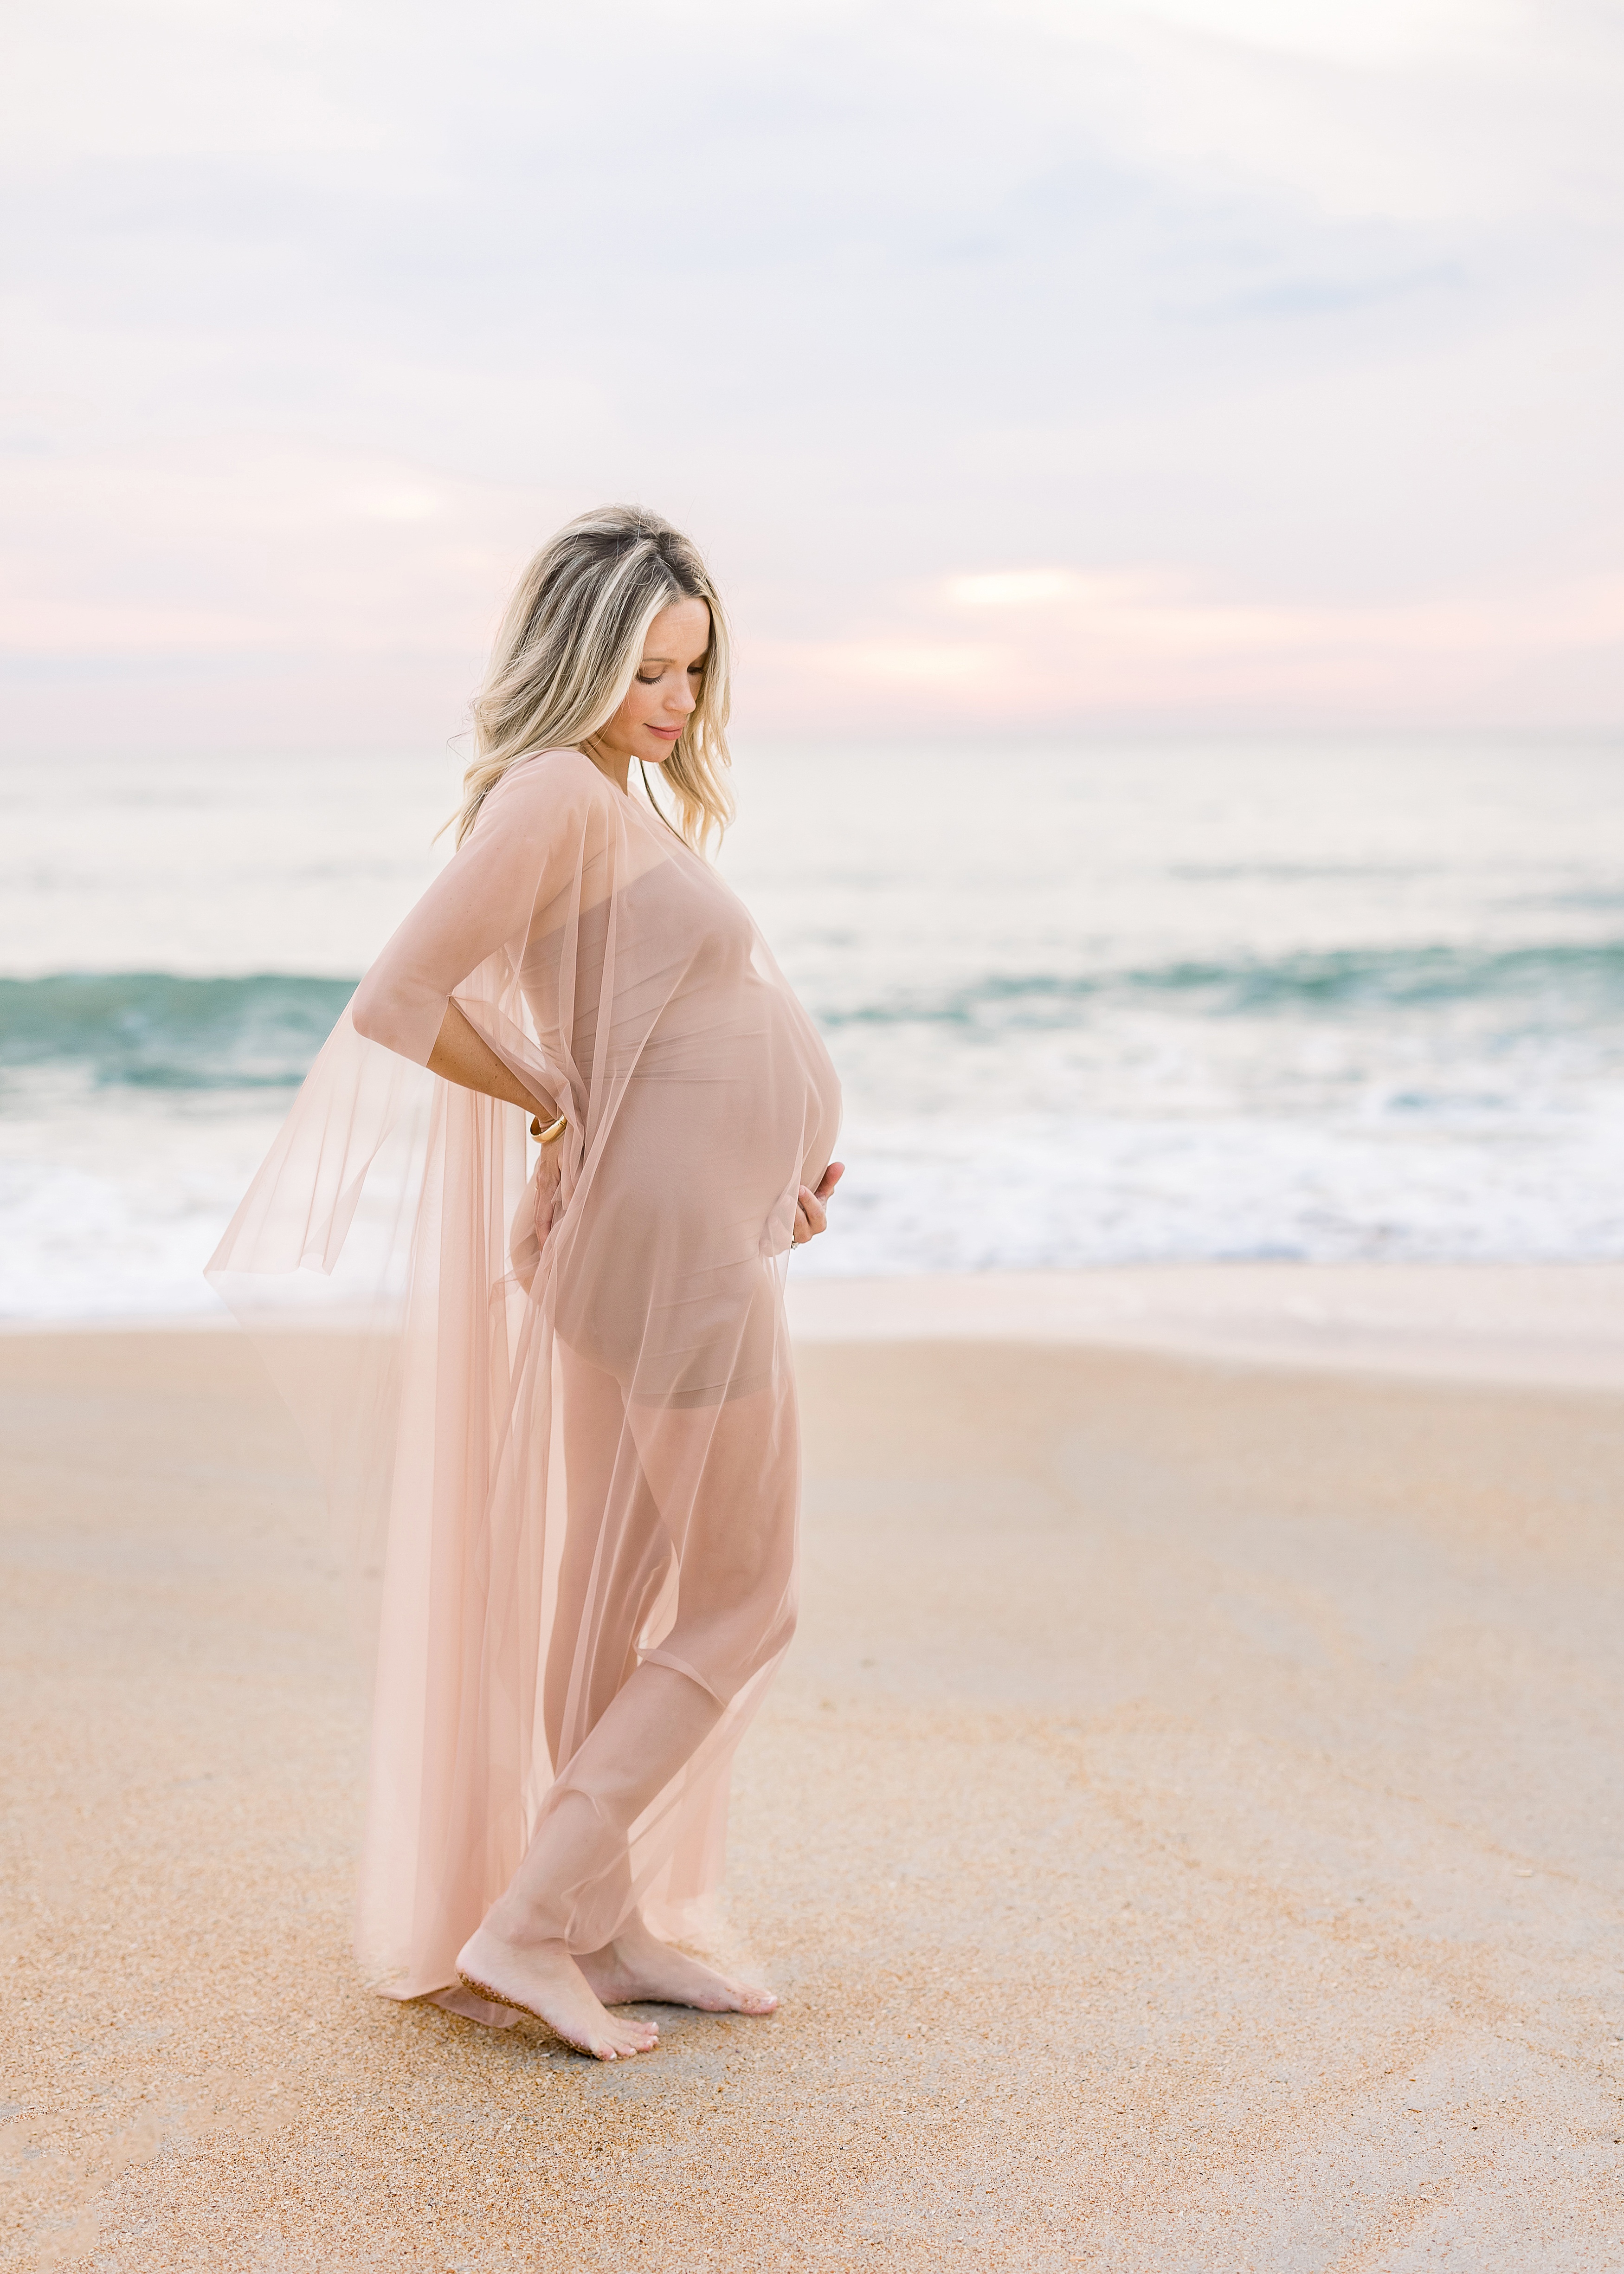 pregnancy portrait of woman at the beach at sunrise